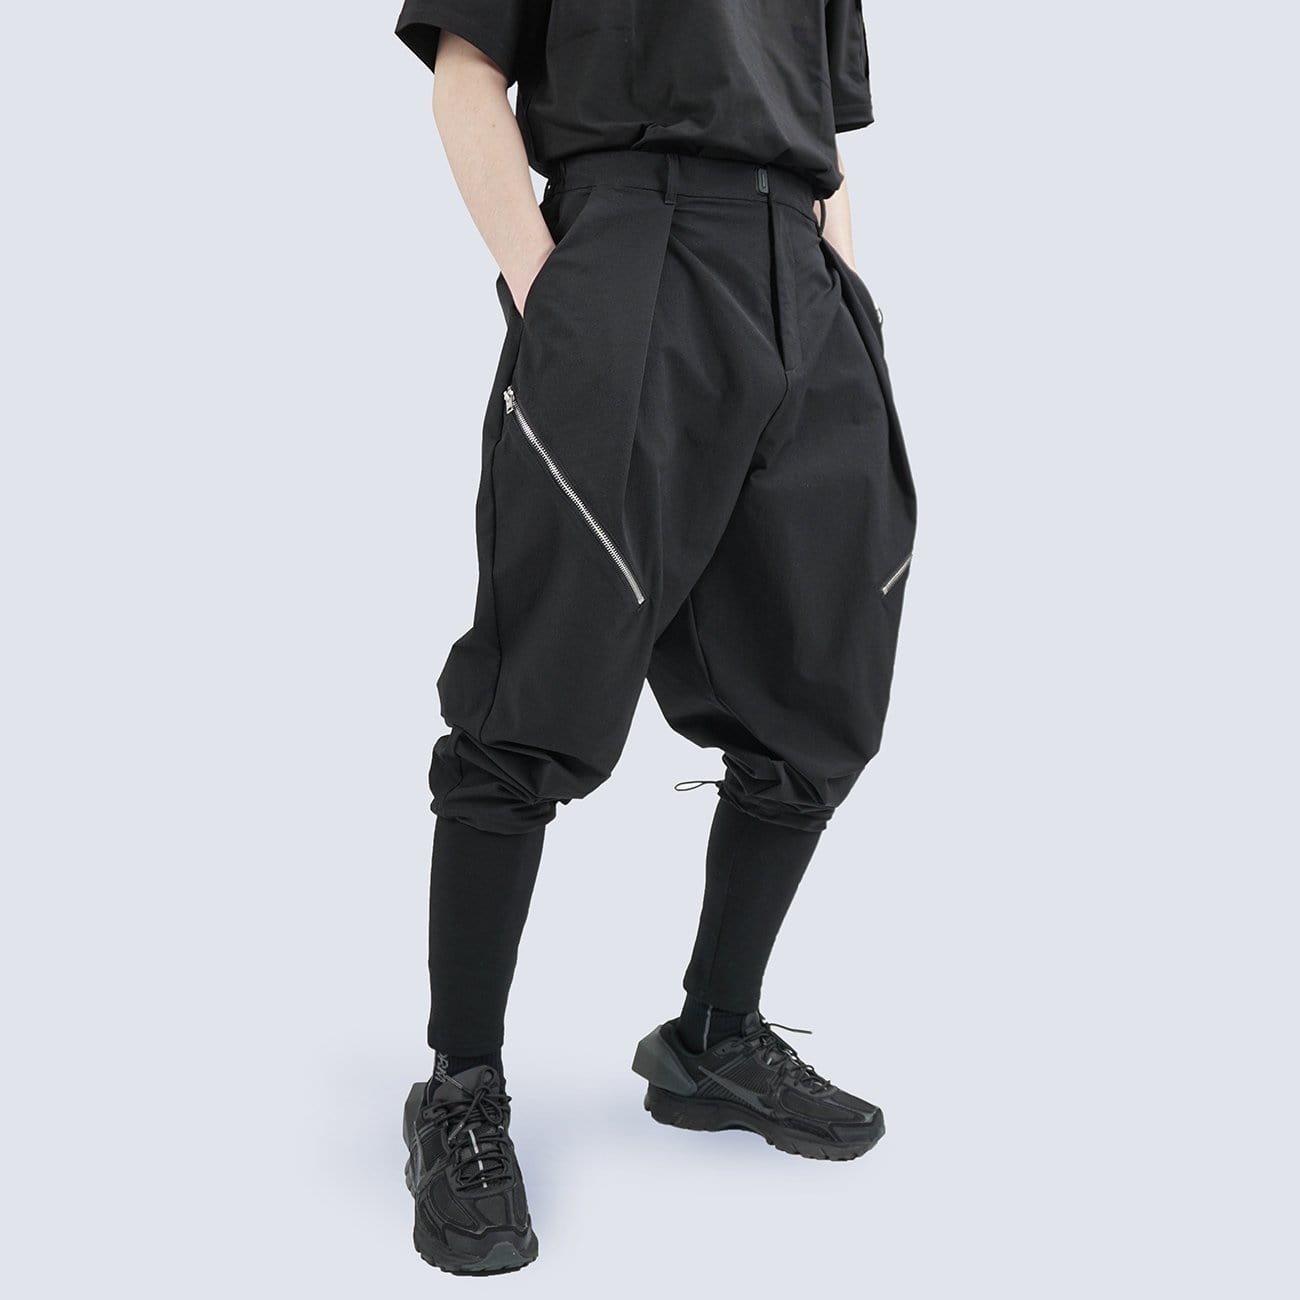 TO Double Piece Drawstring Pants